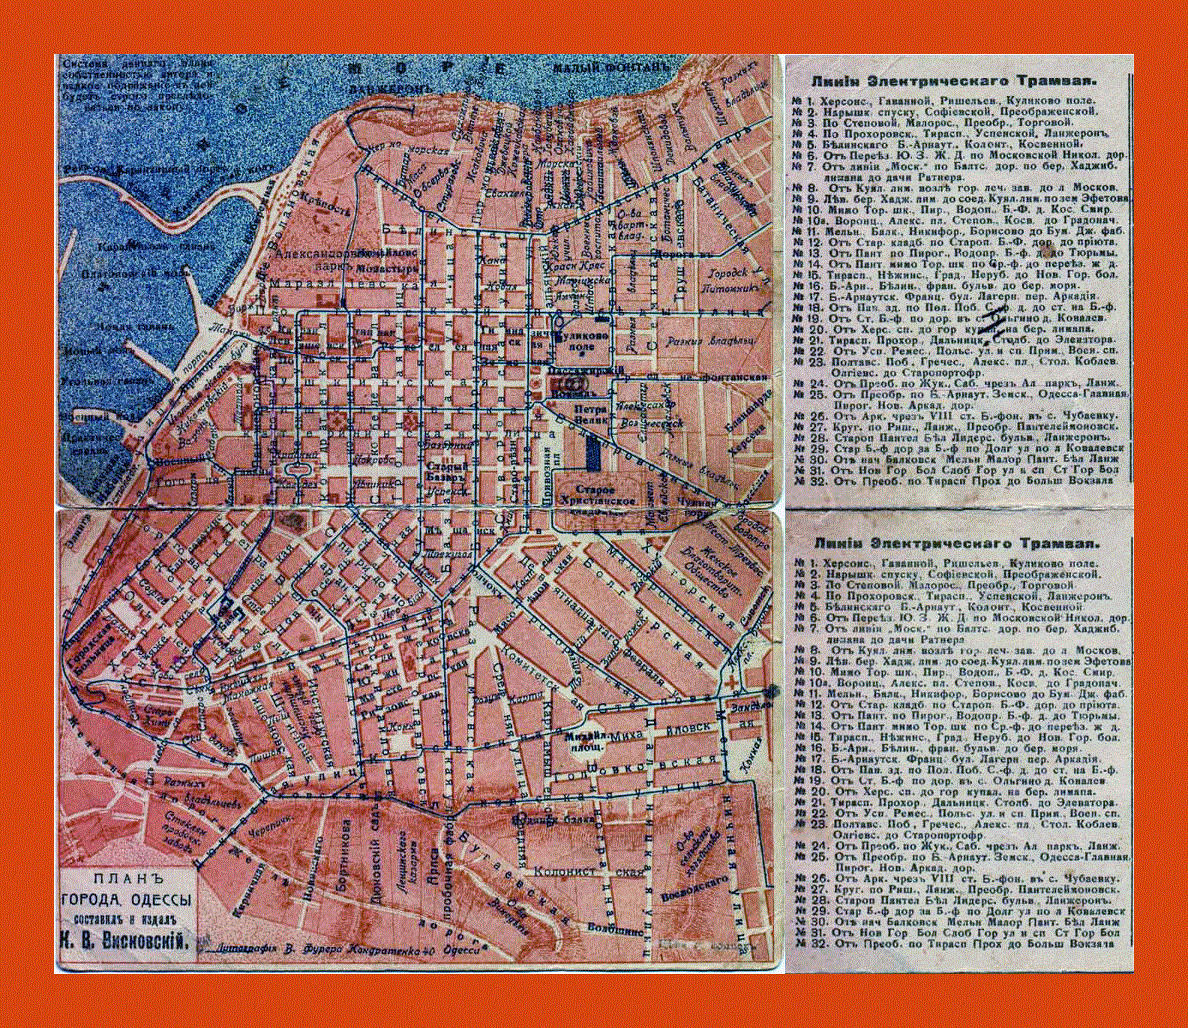 Old map of Odessa city center - 1917